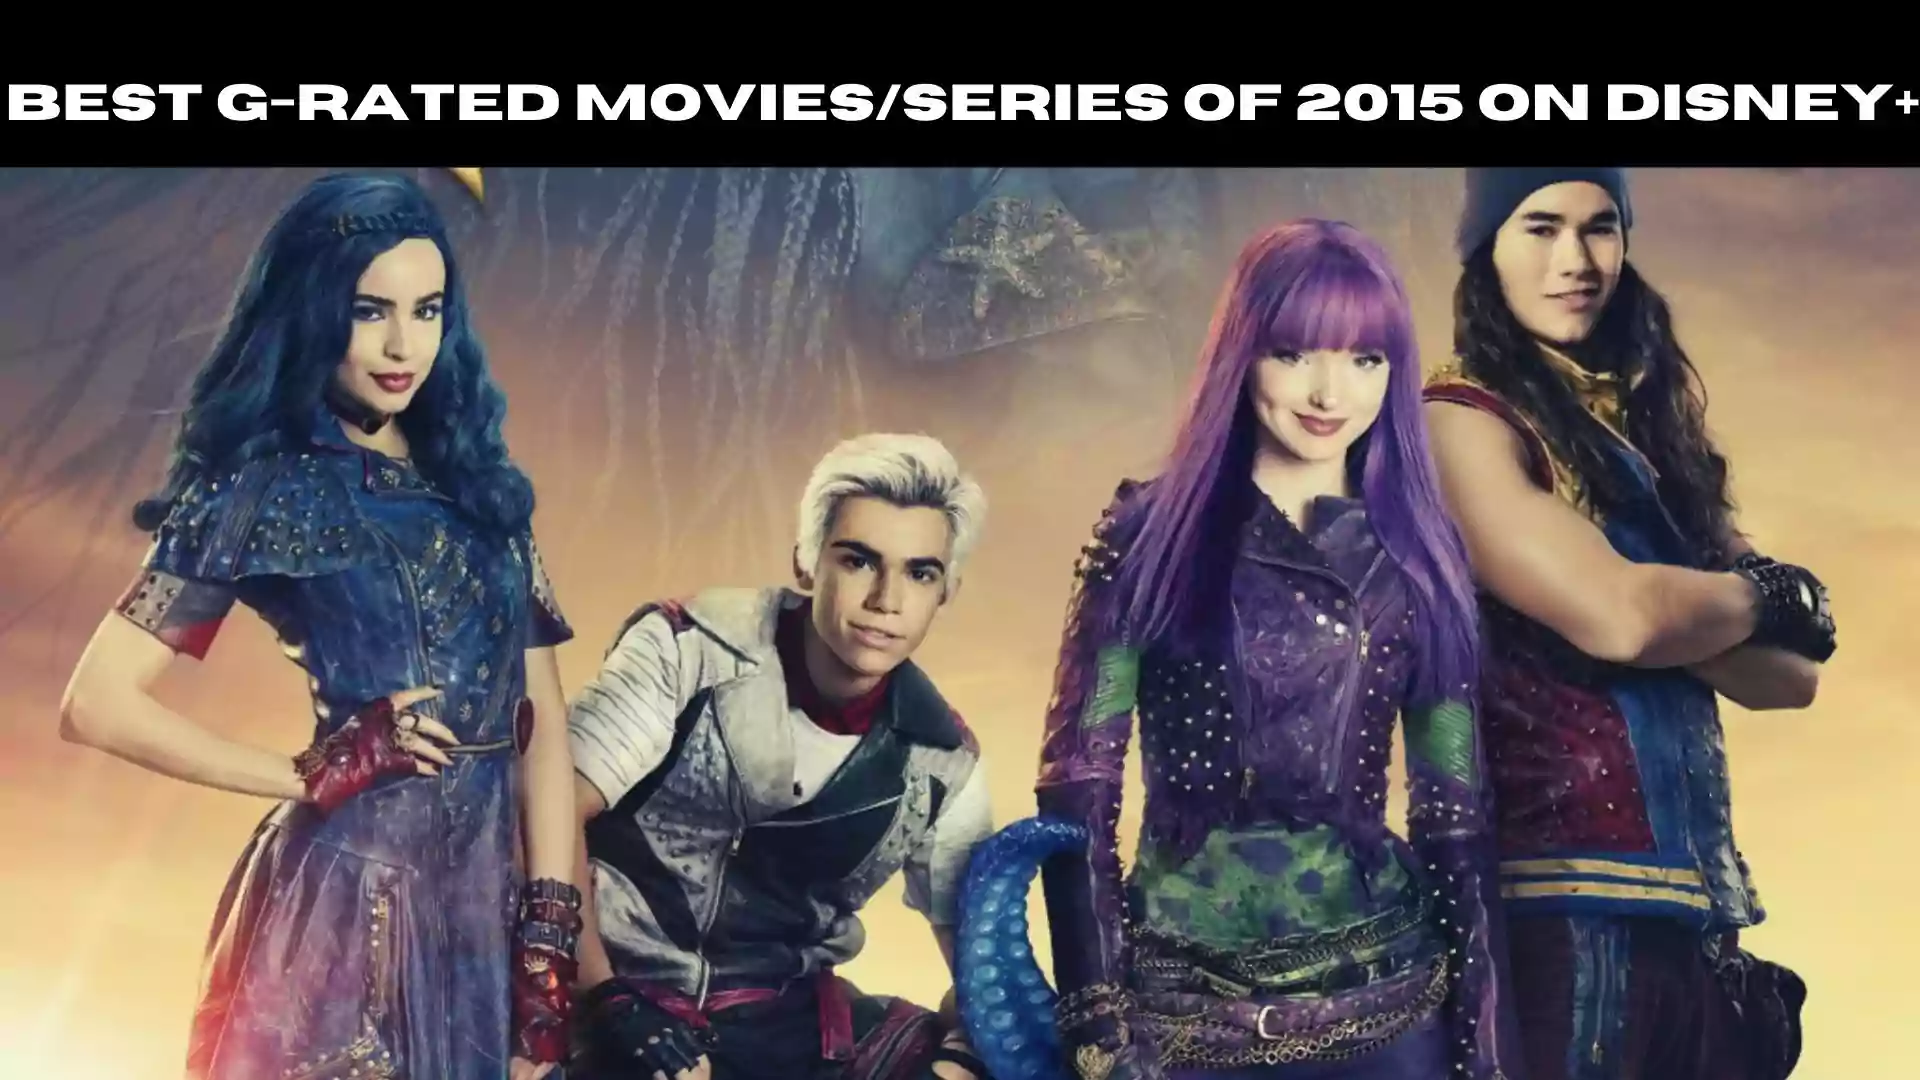 Best G-Rated Movies/series of 2015 on Disney+